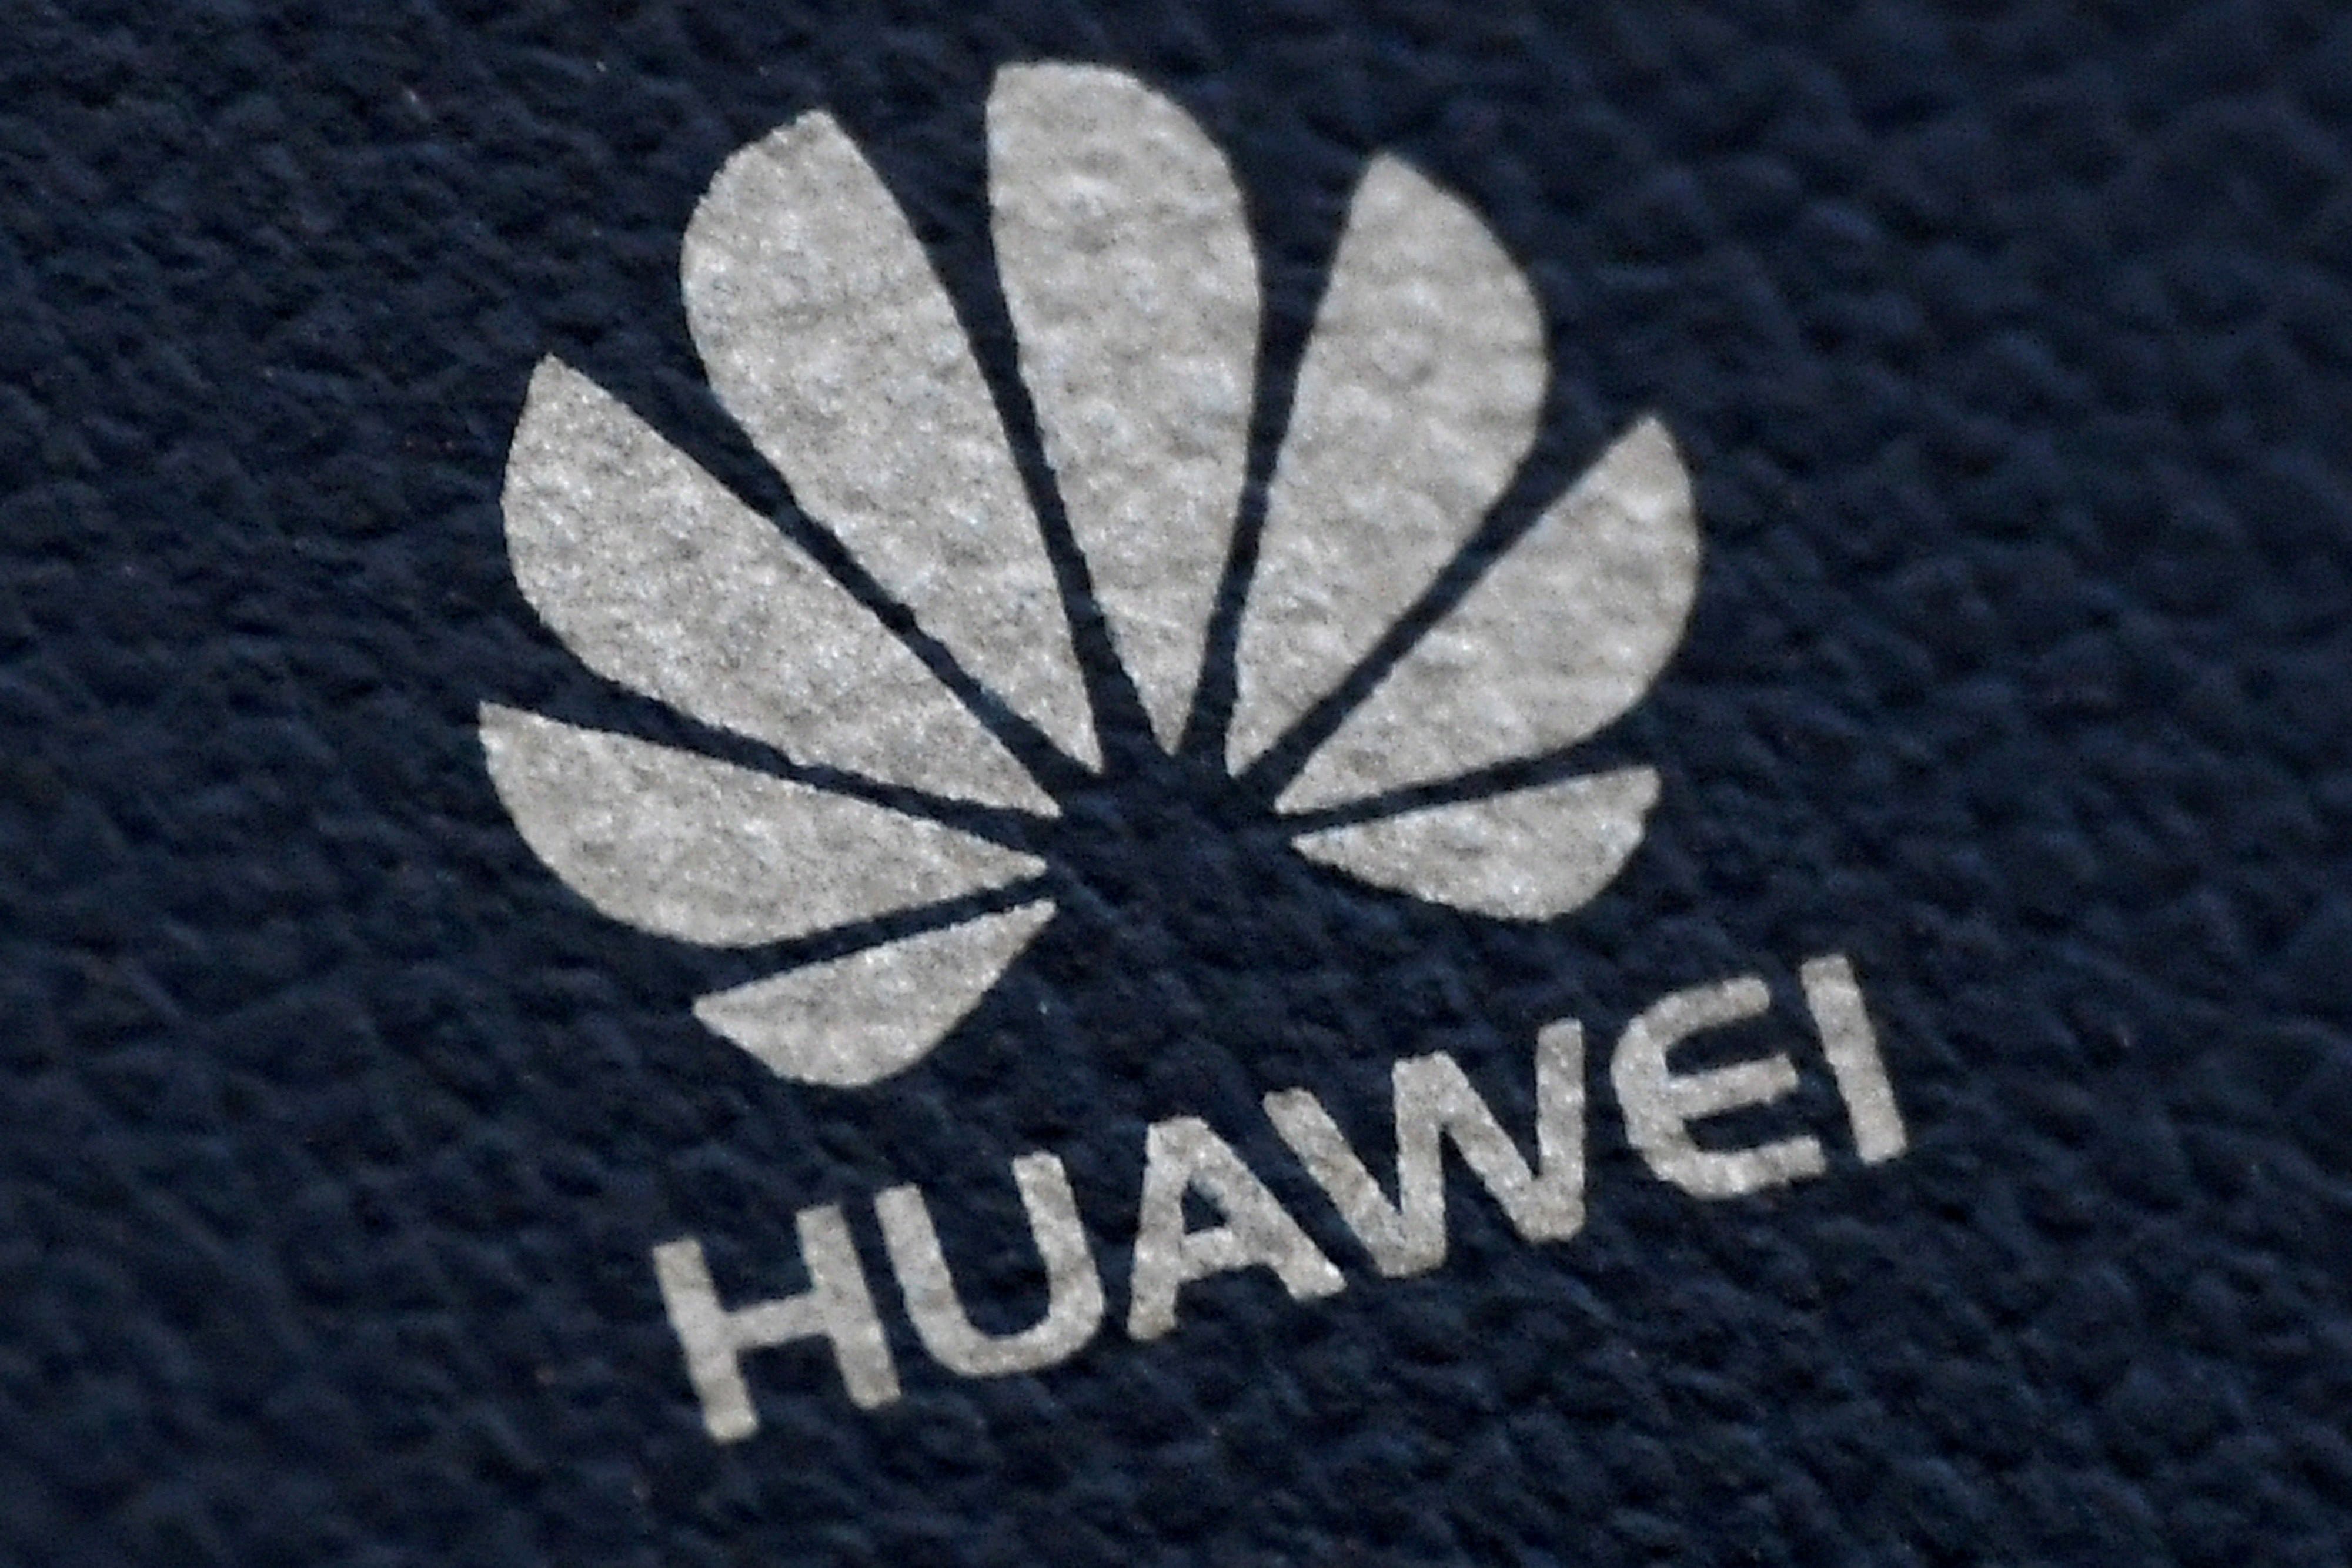 The latest indictment, an update of a case first filed last year, accuses Huawei of plotting to steal the trade secrets and intellectual property of rival companies in the U.S. (Credit: Reuters Photo)